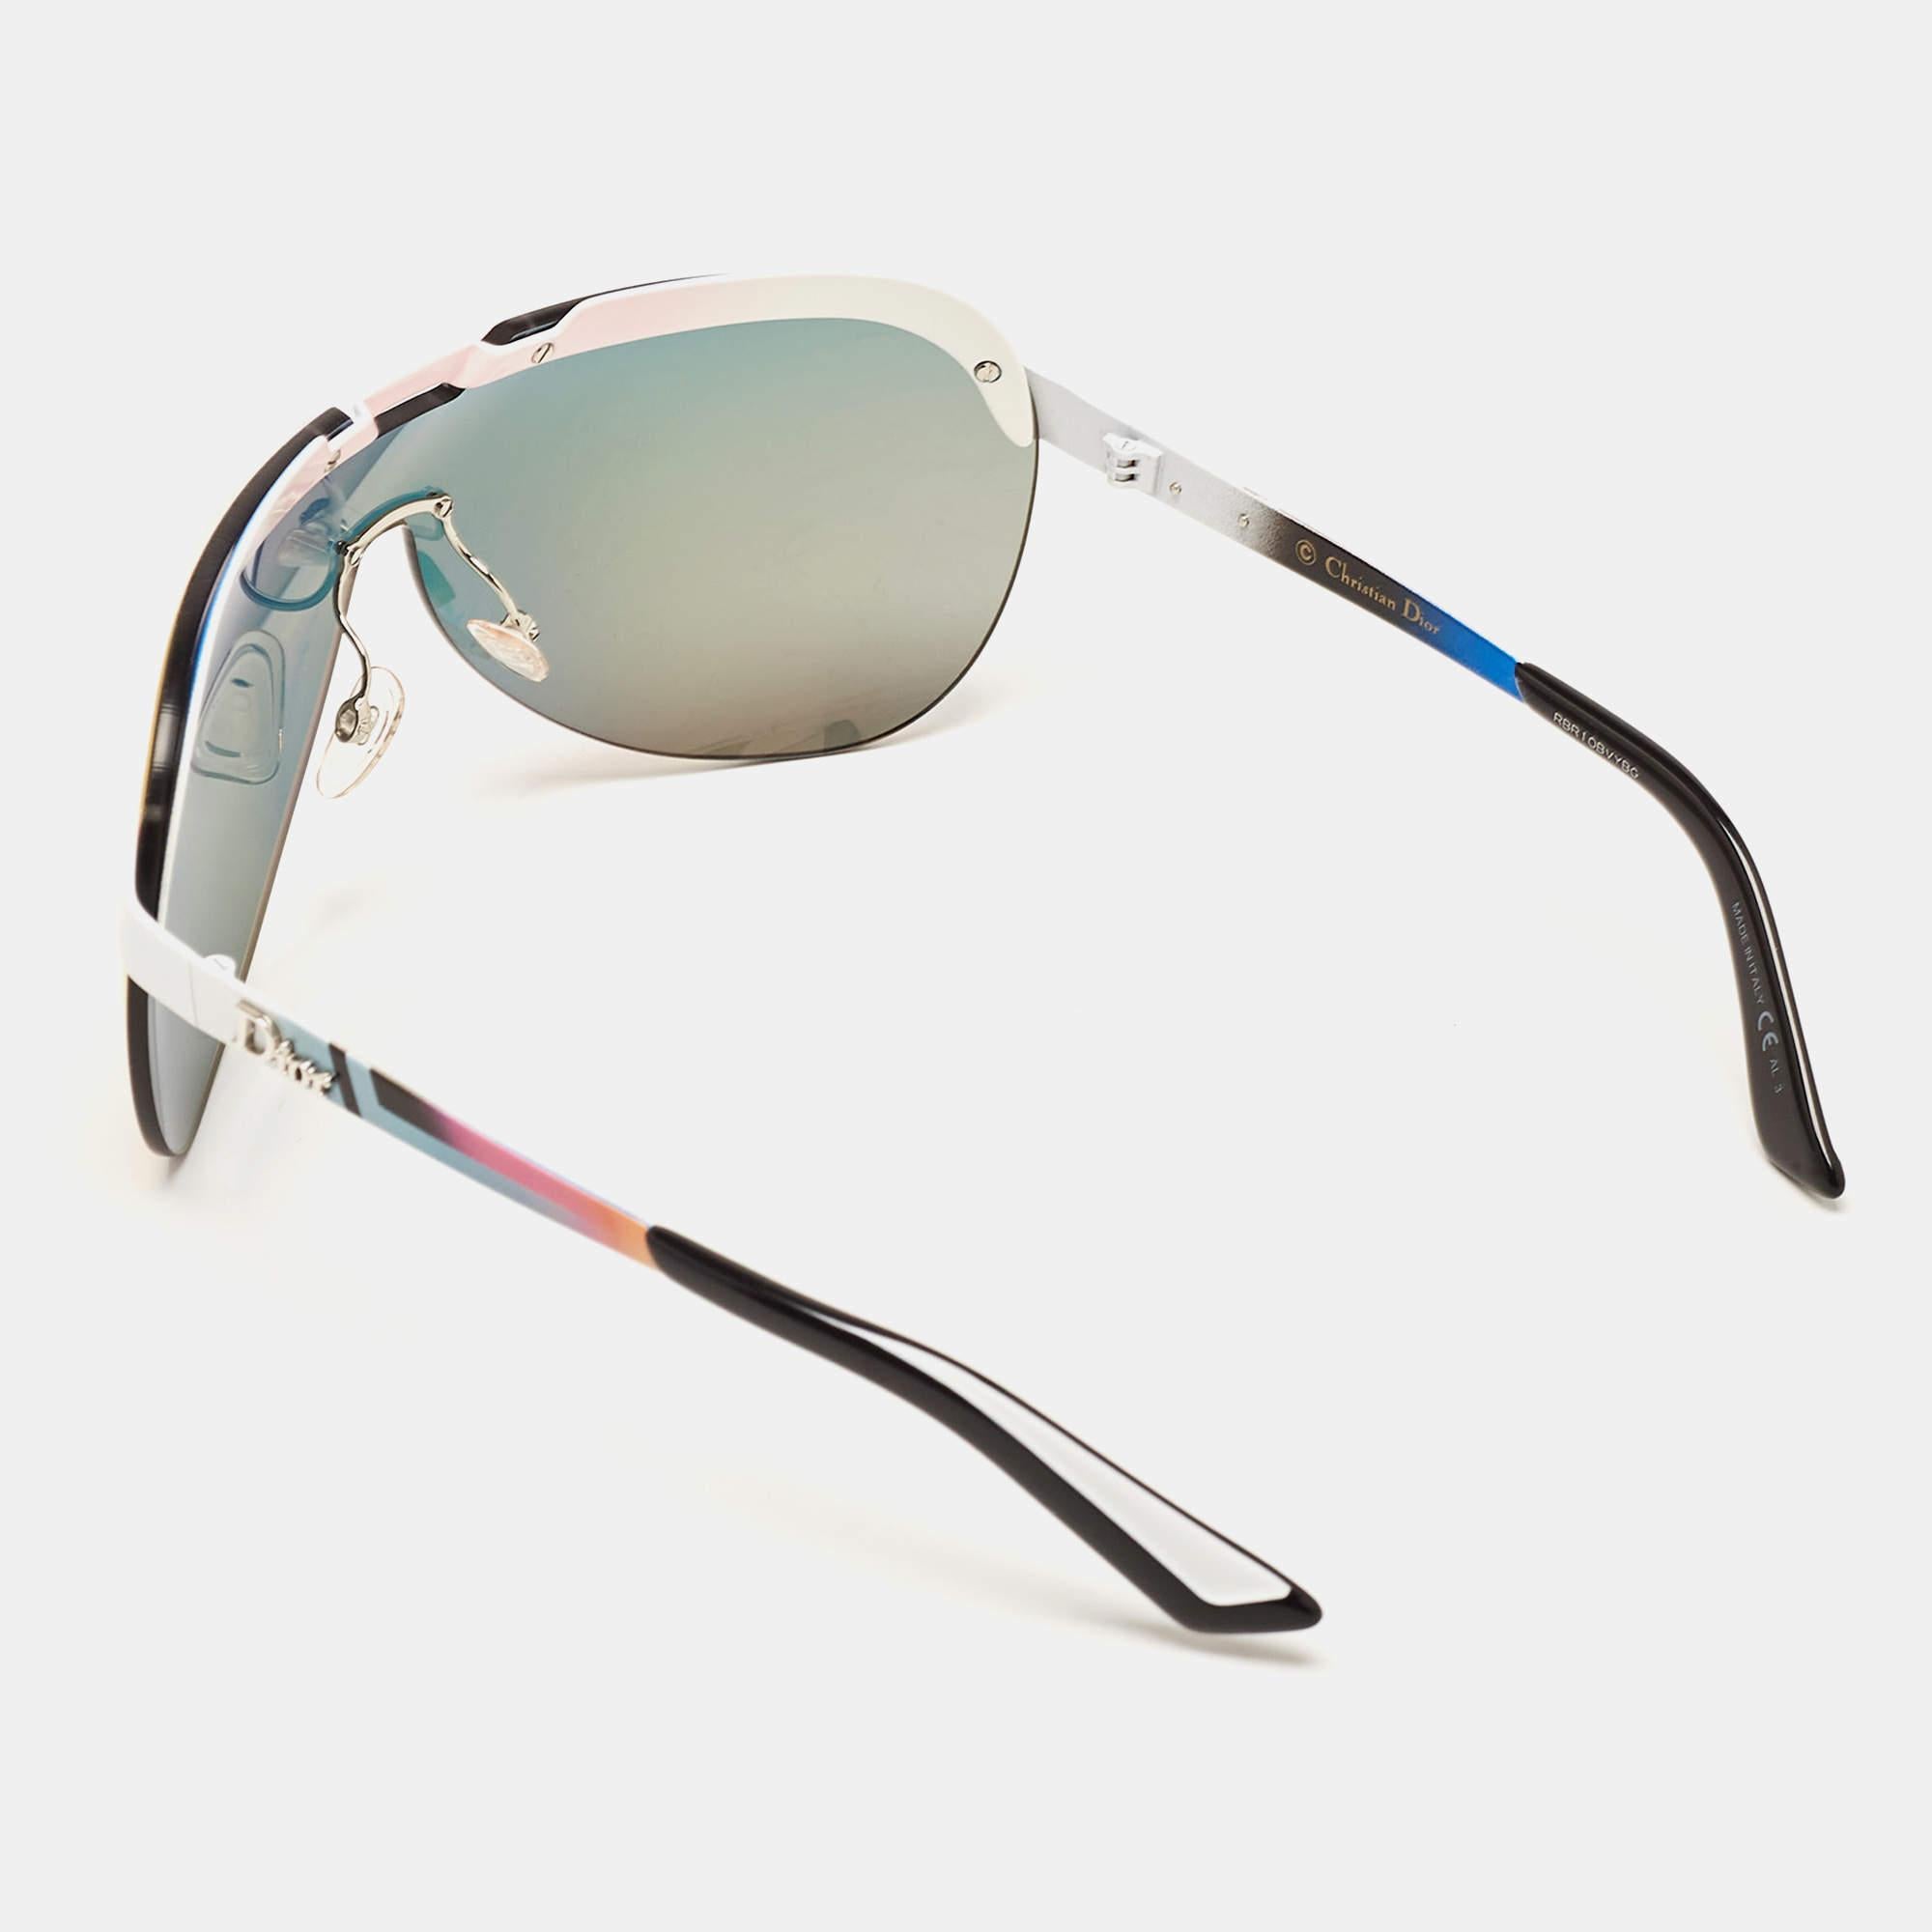 The stylish frame and good-quality lenses make these sunglasses a high-fashion accessory that you must own. Designed by Dior, the pair will look best with your statement outfits.

Includes: Original Box

